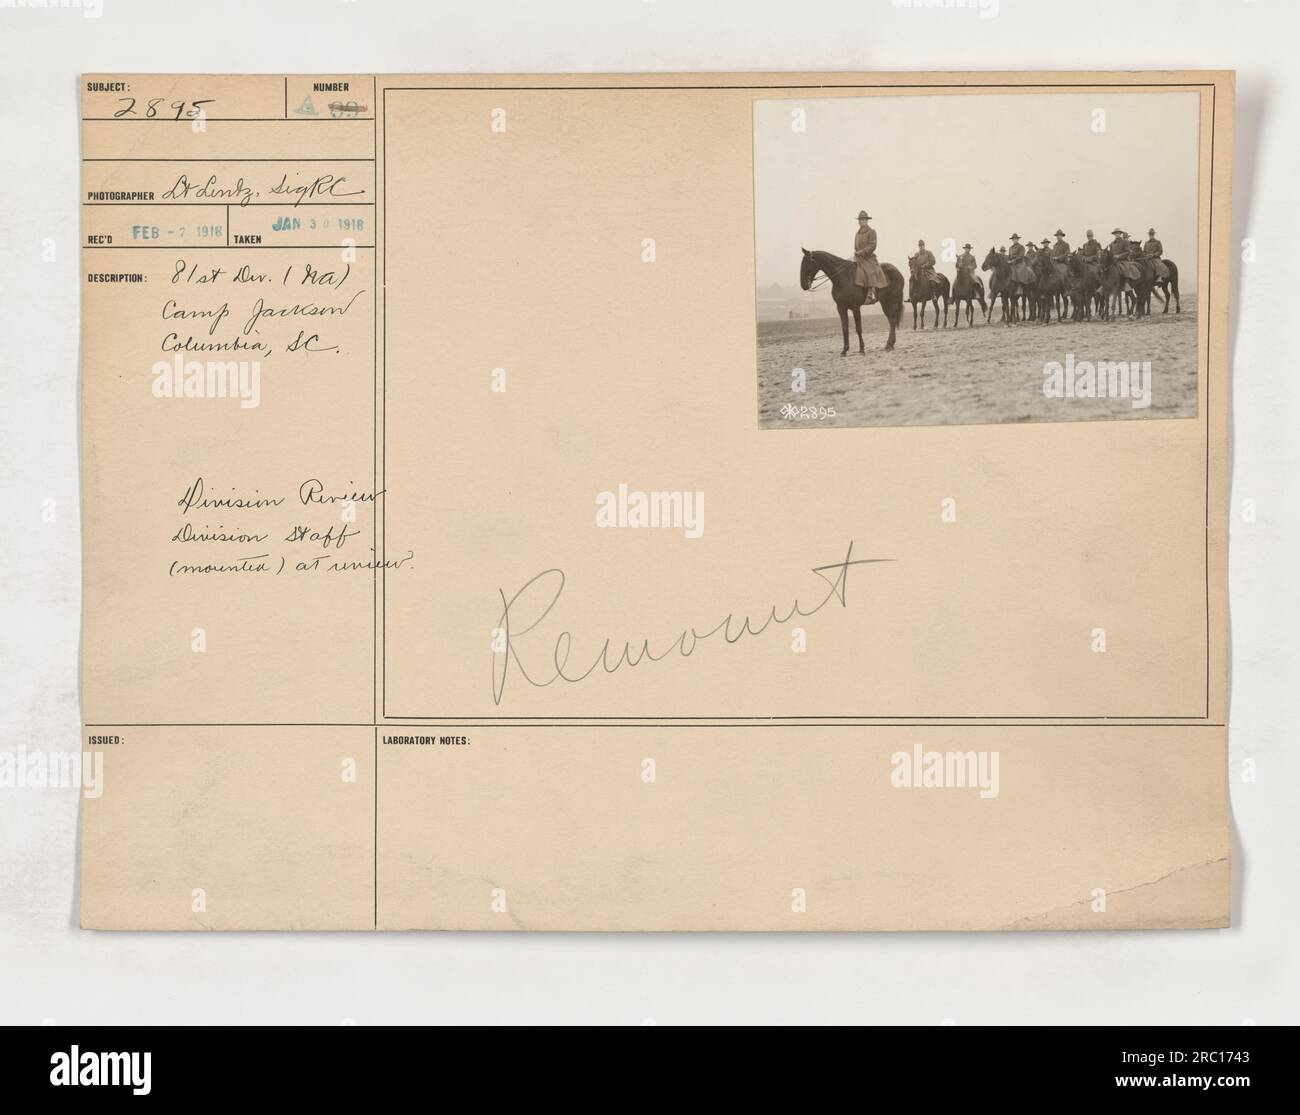 81st Division (NA) Camp Jackson, Columbia, SC. Division Staff (mounted) at a division review. Photograph taken by D. Lintz, SighC on January 30, 1918. The photo is numbered 2895 and was issued as part of the 81st Division materials. It was remounted for display purposes. Stock Photo